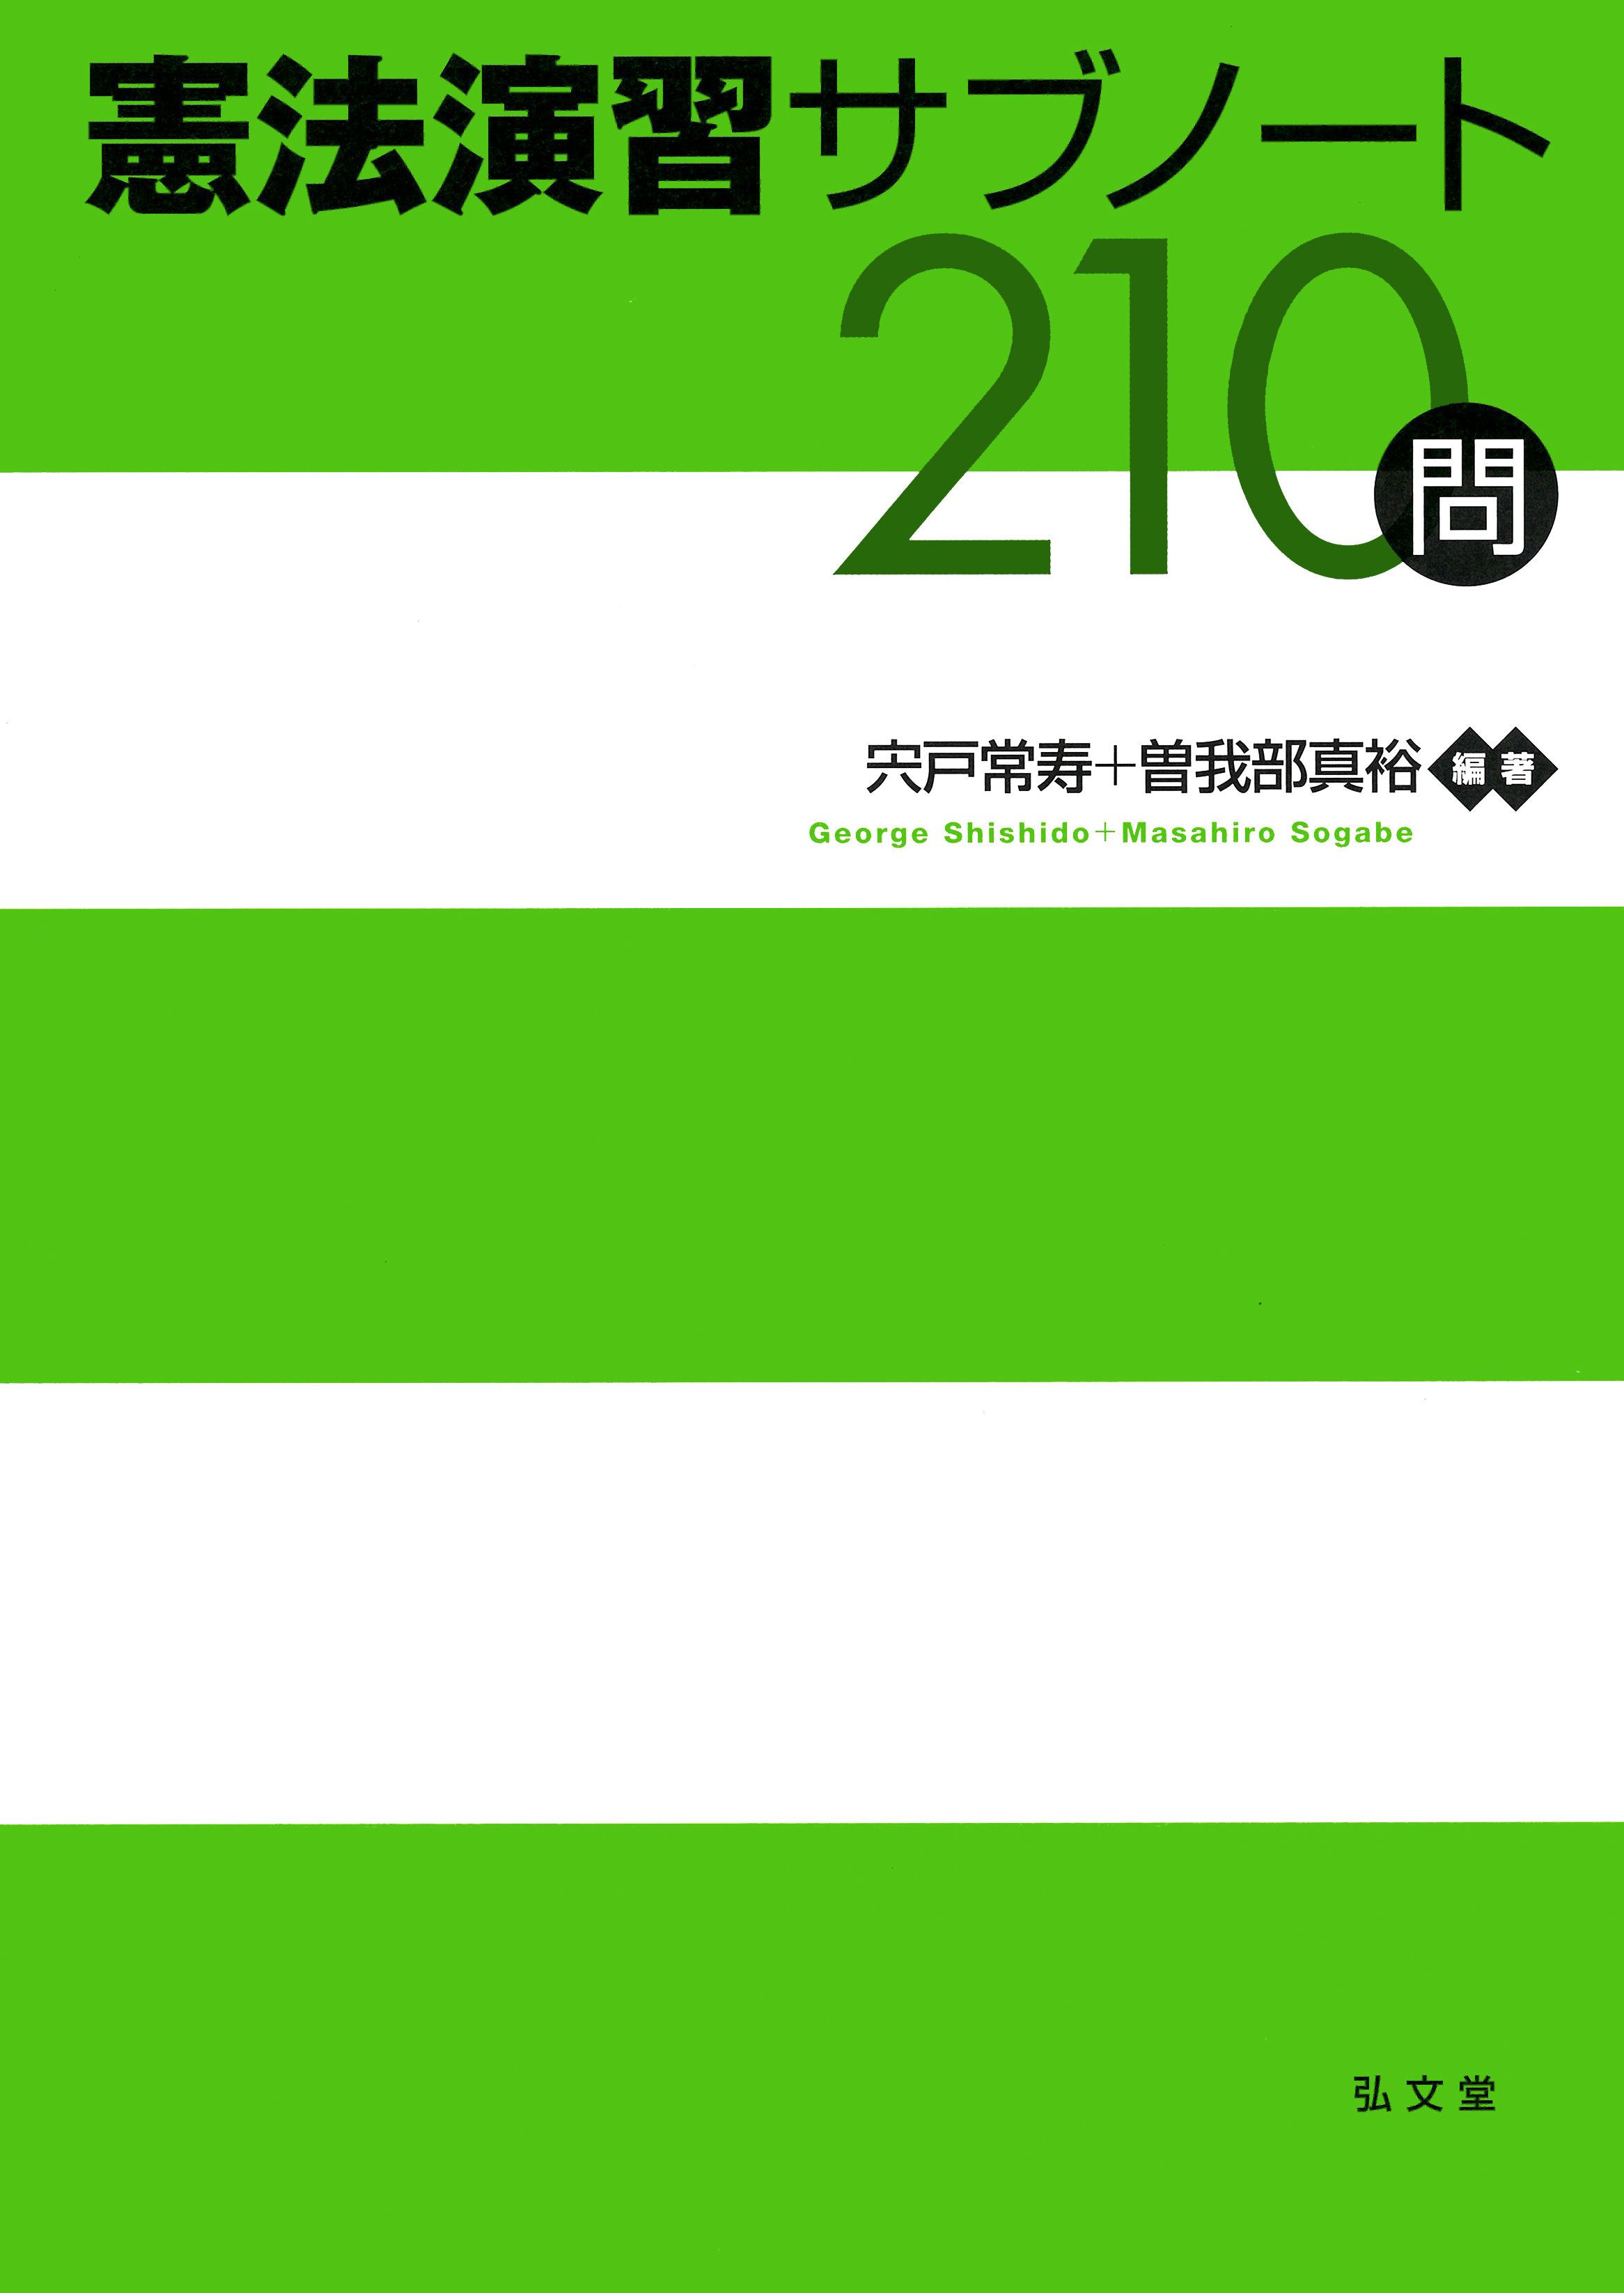 a light green and white cover